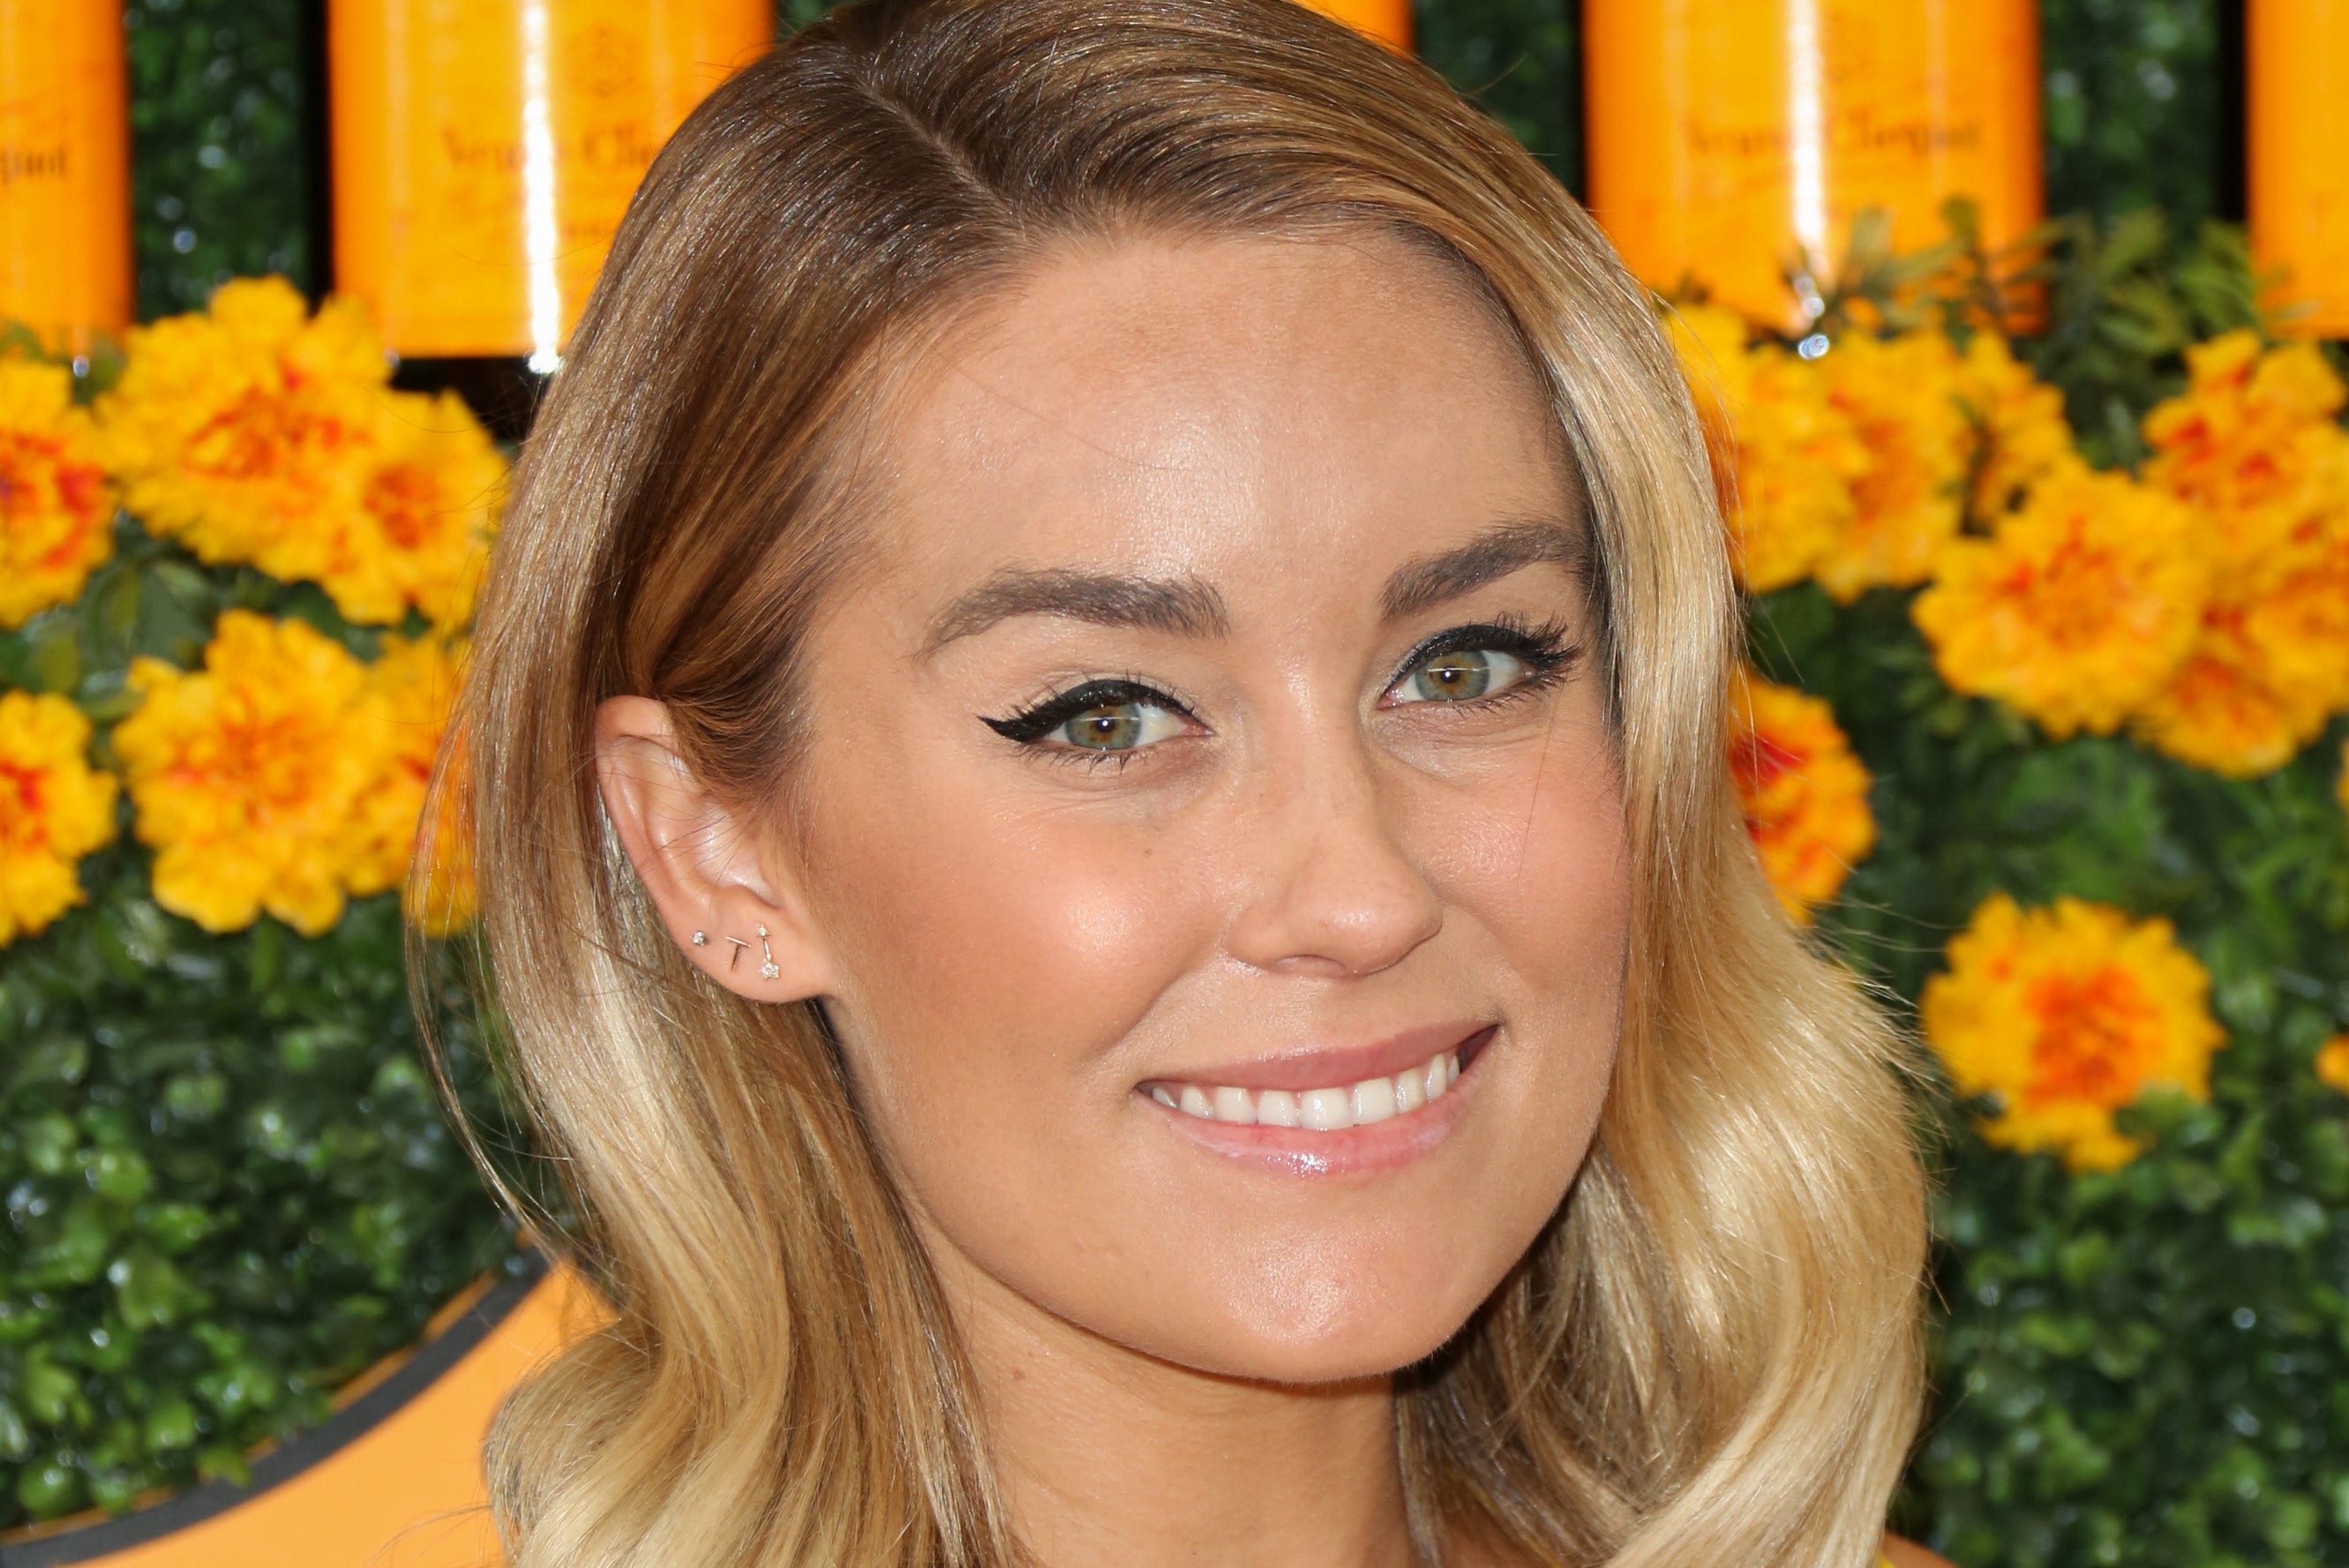 Lauren Conrad Welcomes Second Child With Husband William Tell